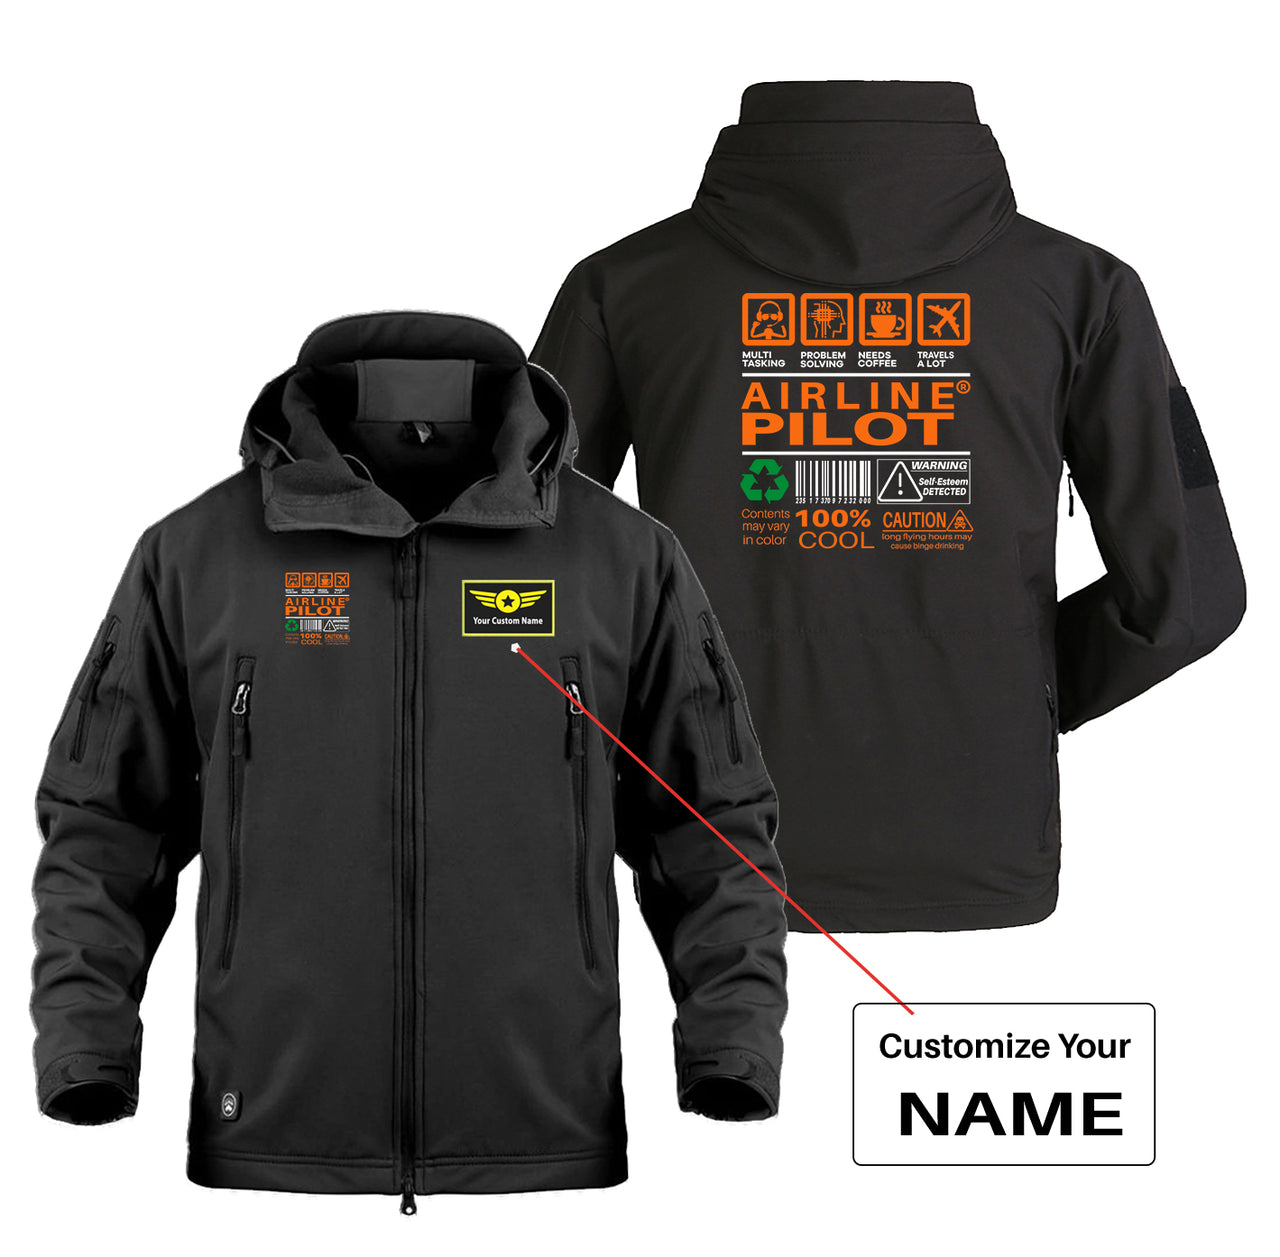 Airline Pilot Label Designed Military Jackets (Customizable)